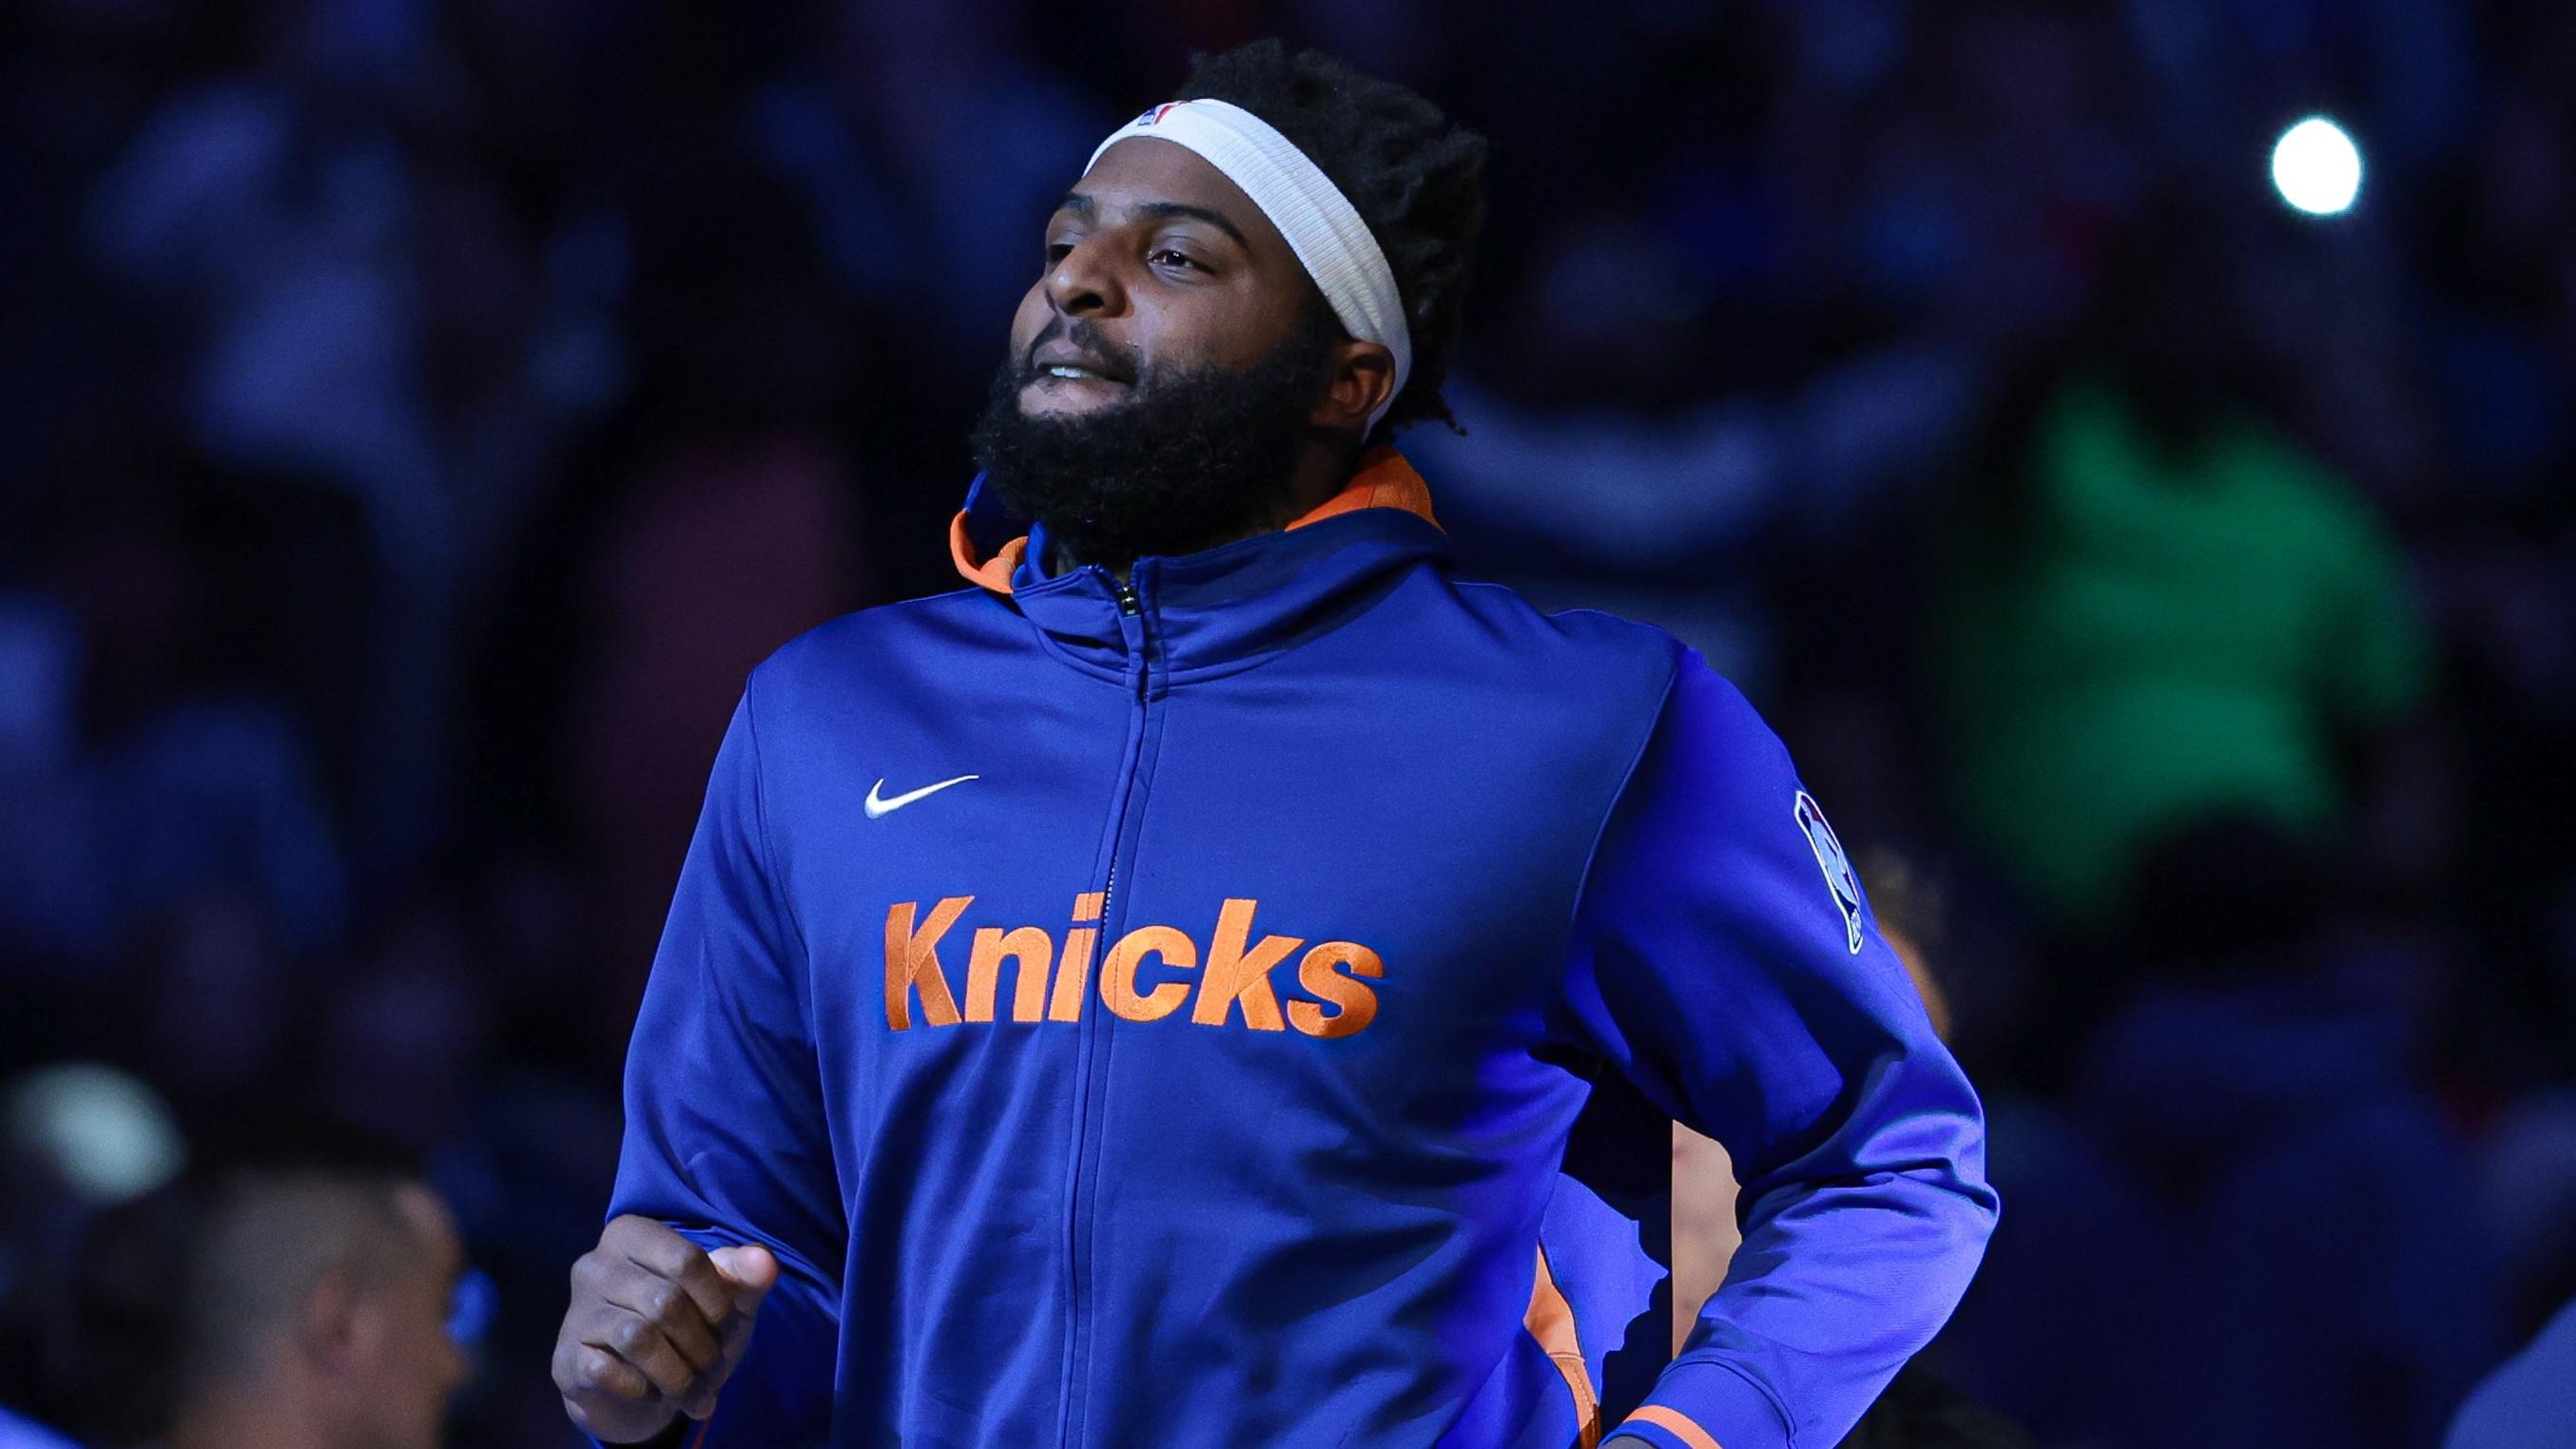 New York Knicks center Mitchell Robinson (23) runs out during introductions before the game against the Washington Wizards at Madison Square Garden / Vincent Carchietta - USA TODAY Sports